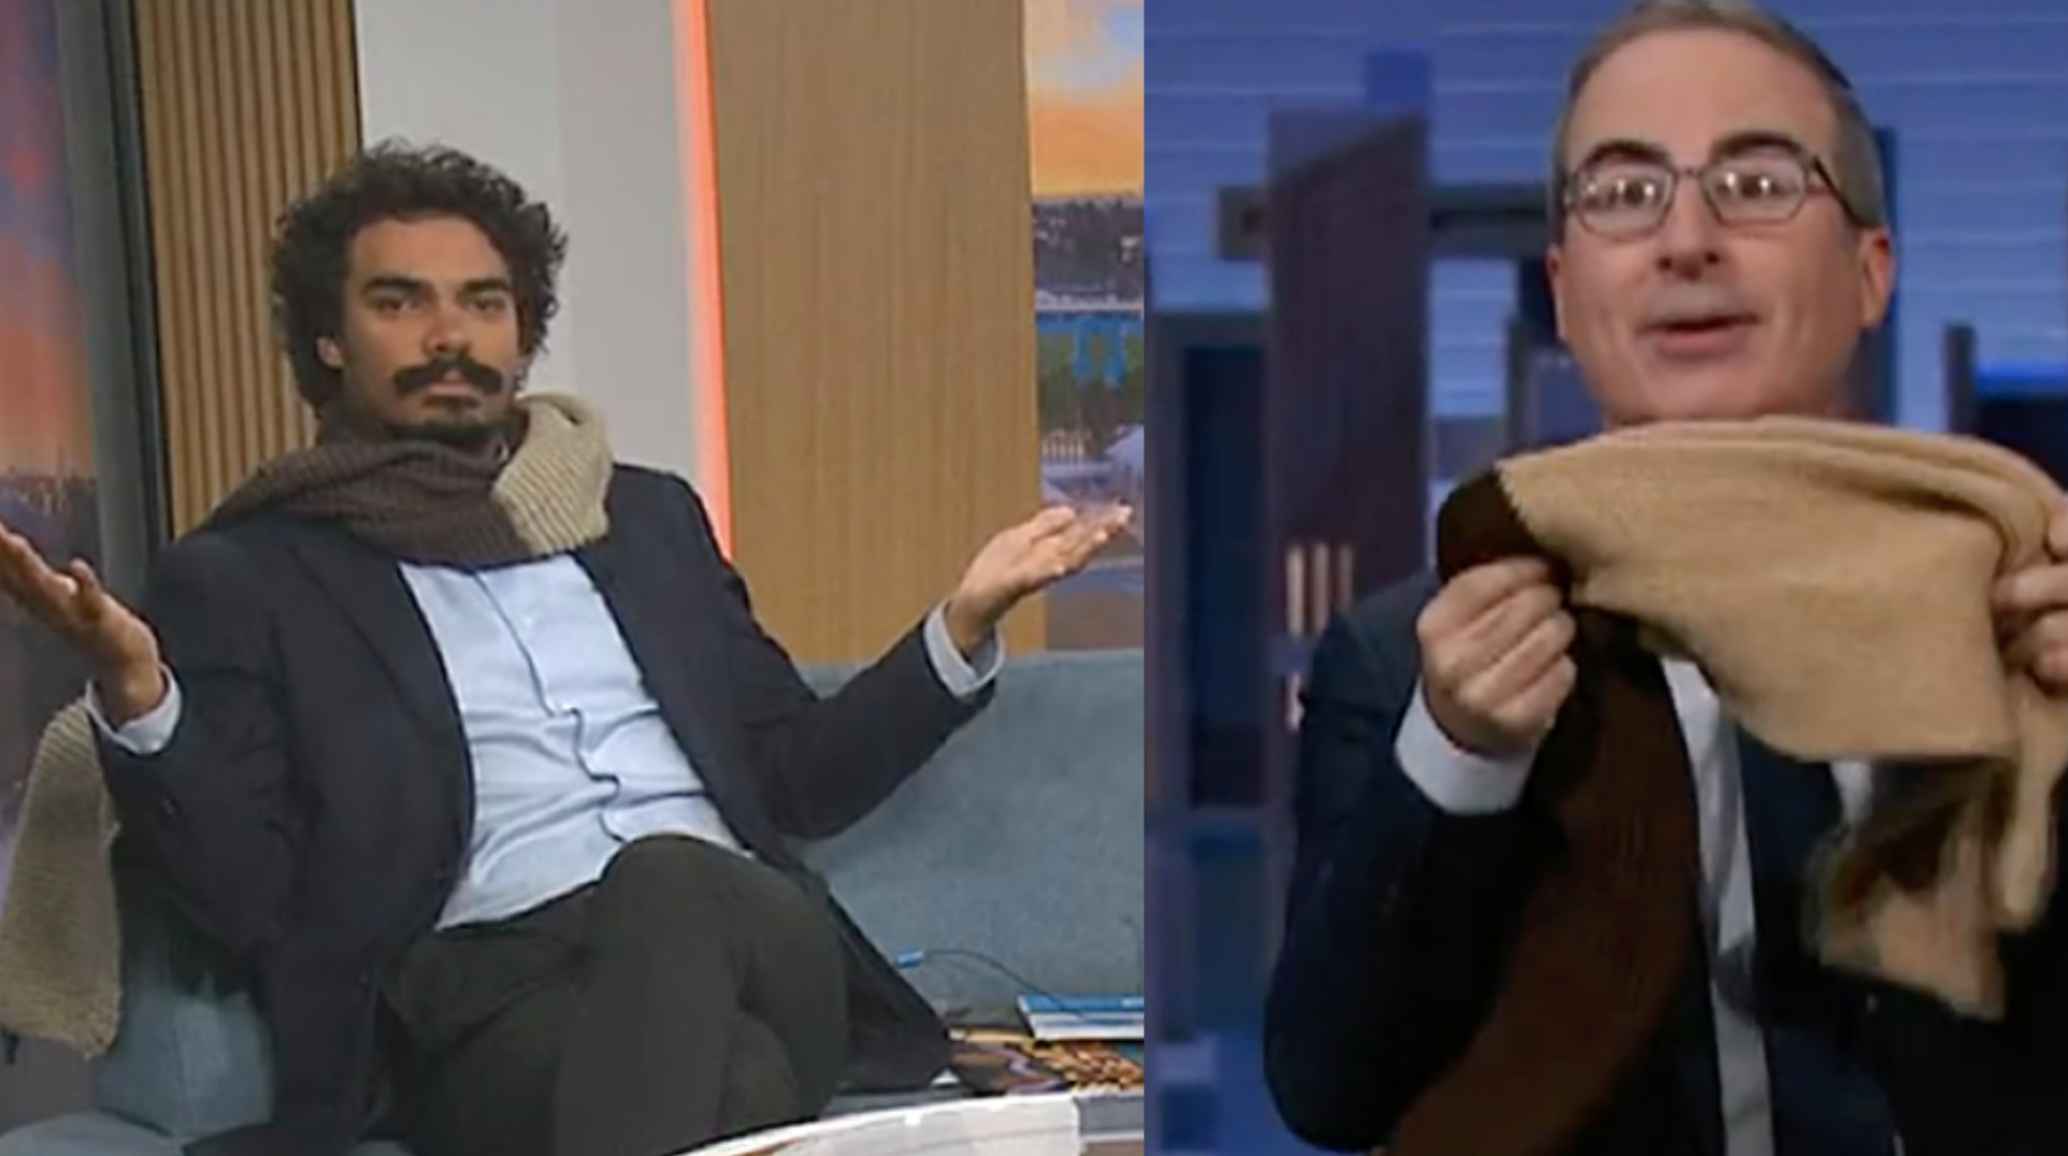 John Oliver's claim to own Tony Armstrong's mother's scarf